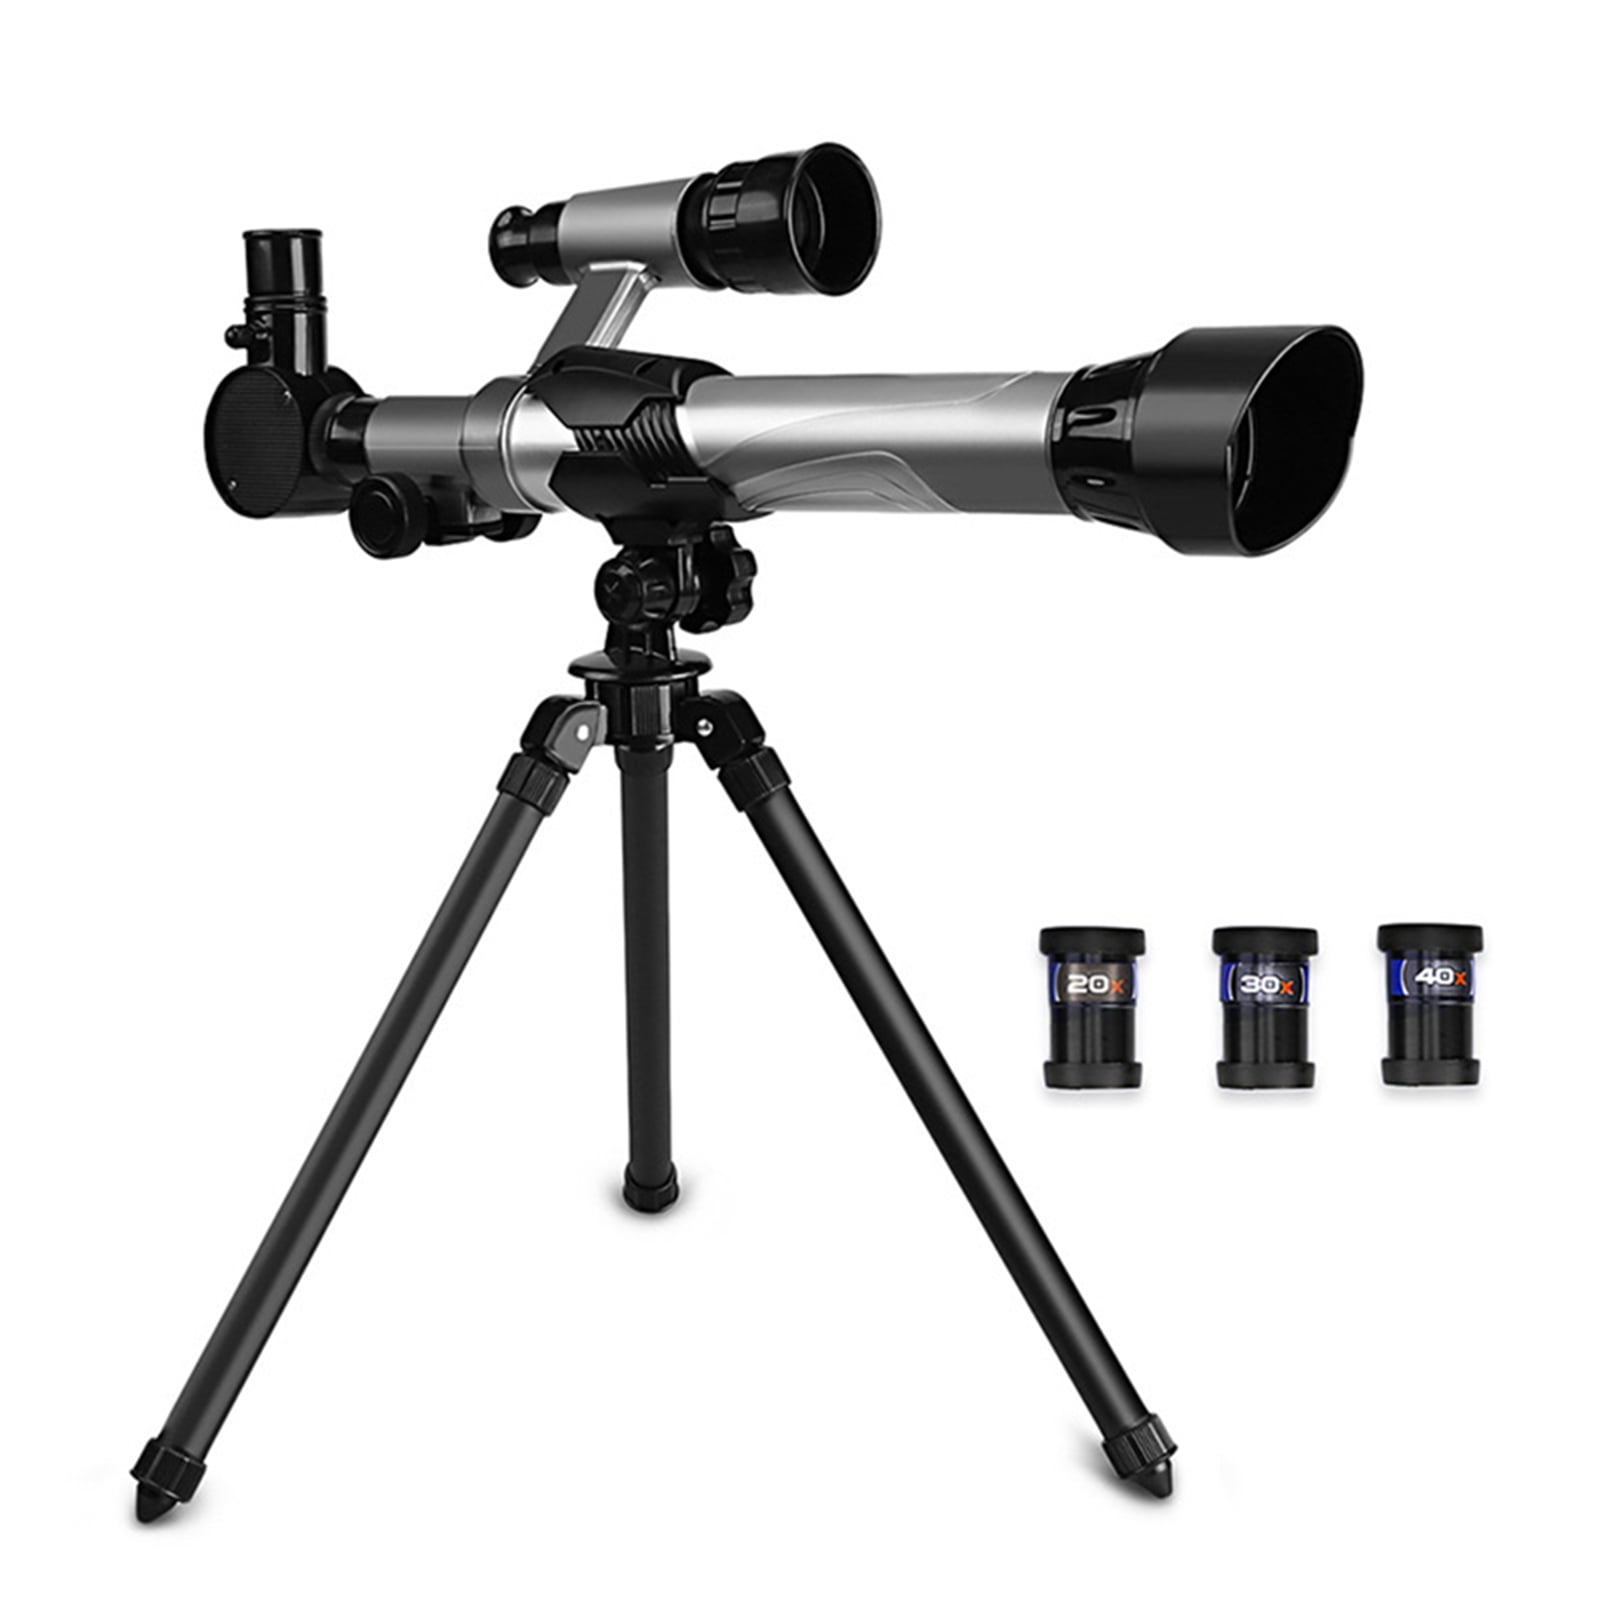 Refractor Telescope for Kids and Adults for Kids and Astronomy Beginners SZWHO Portable Travel Telescope Astronomy Telescopes 